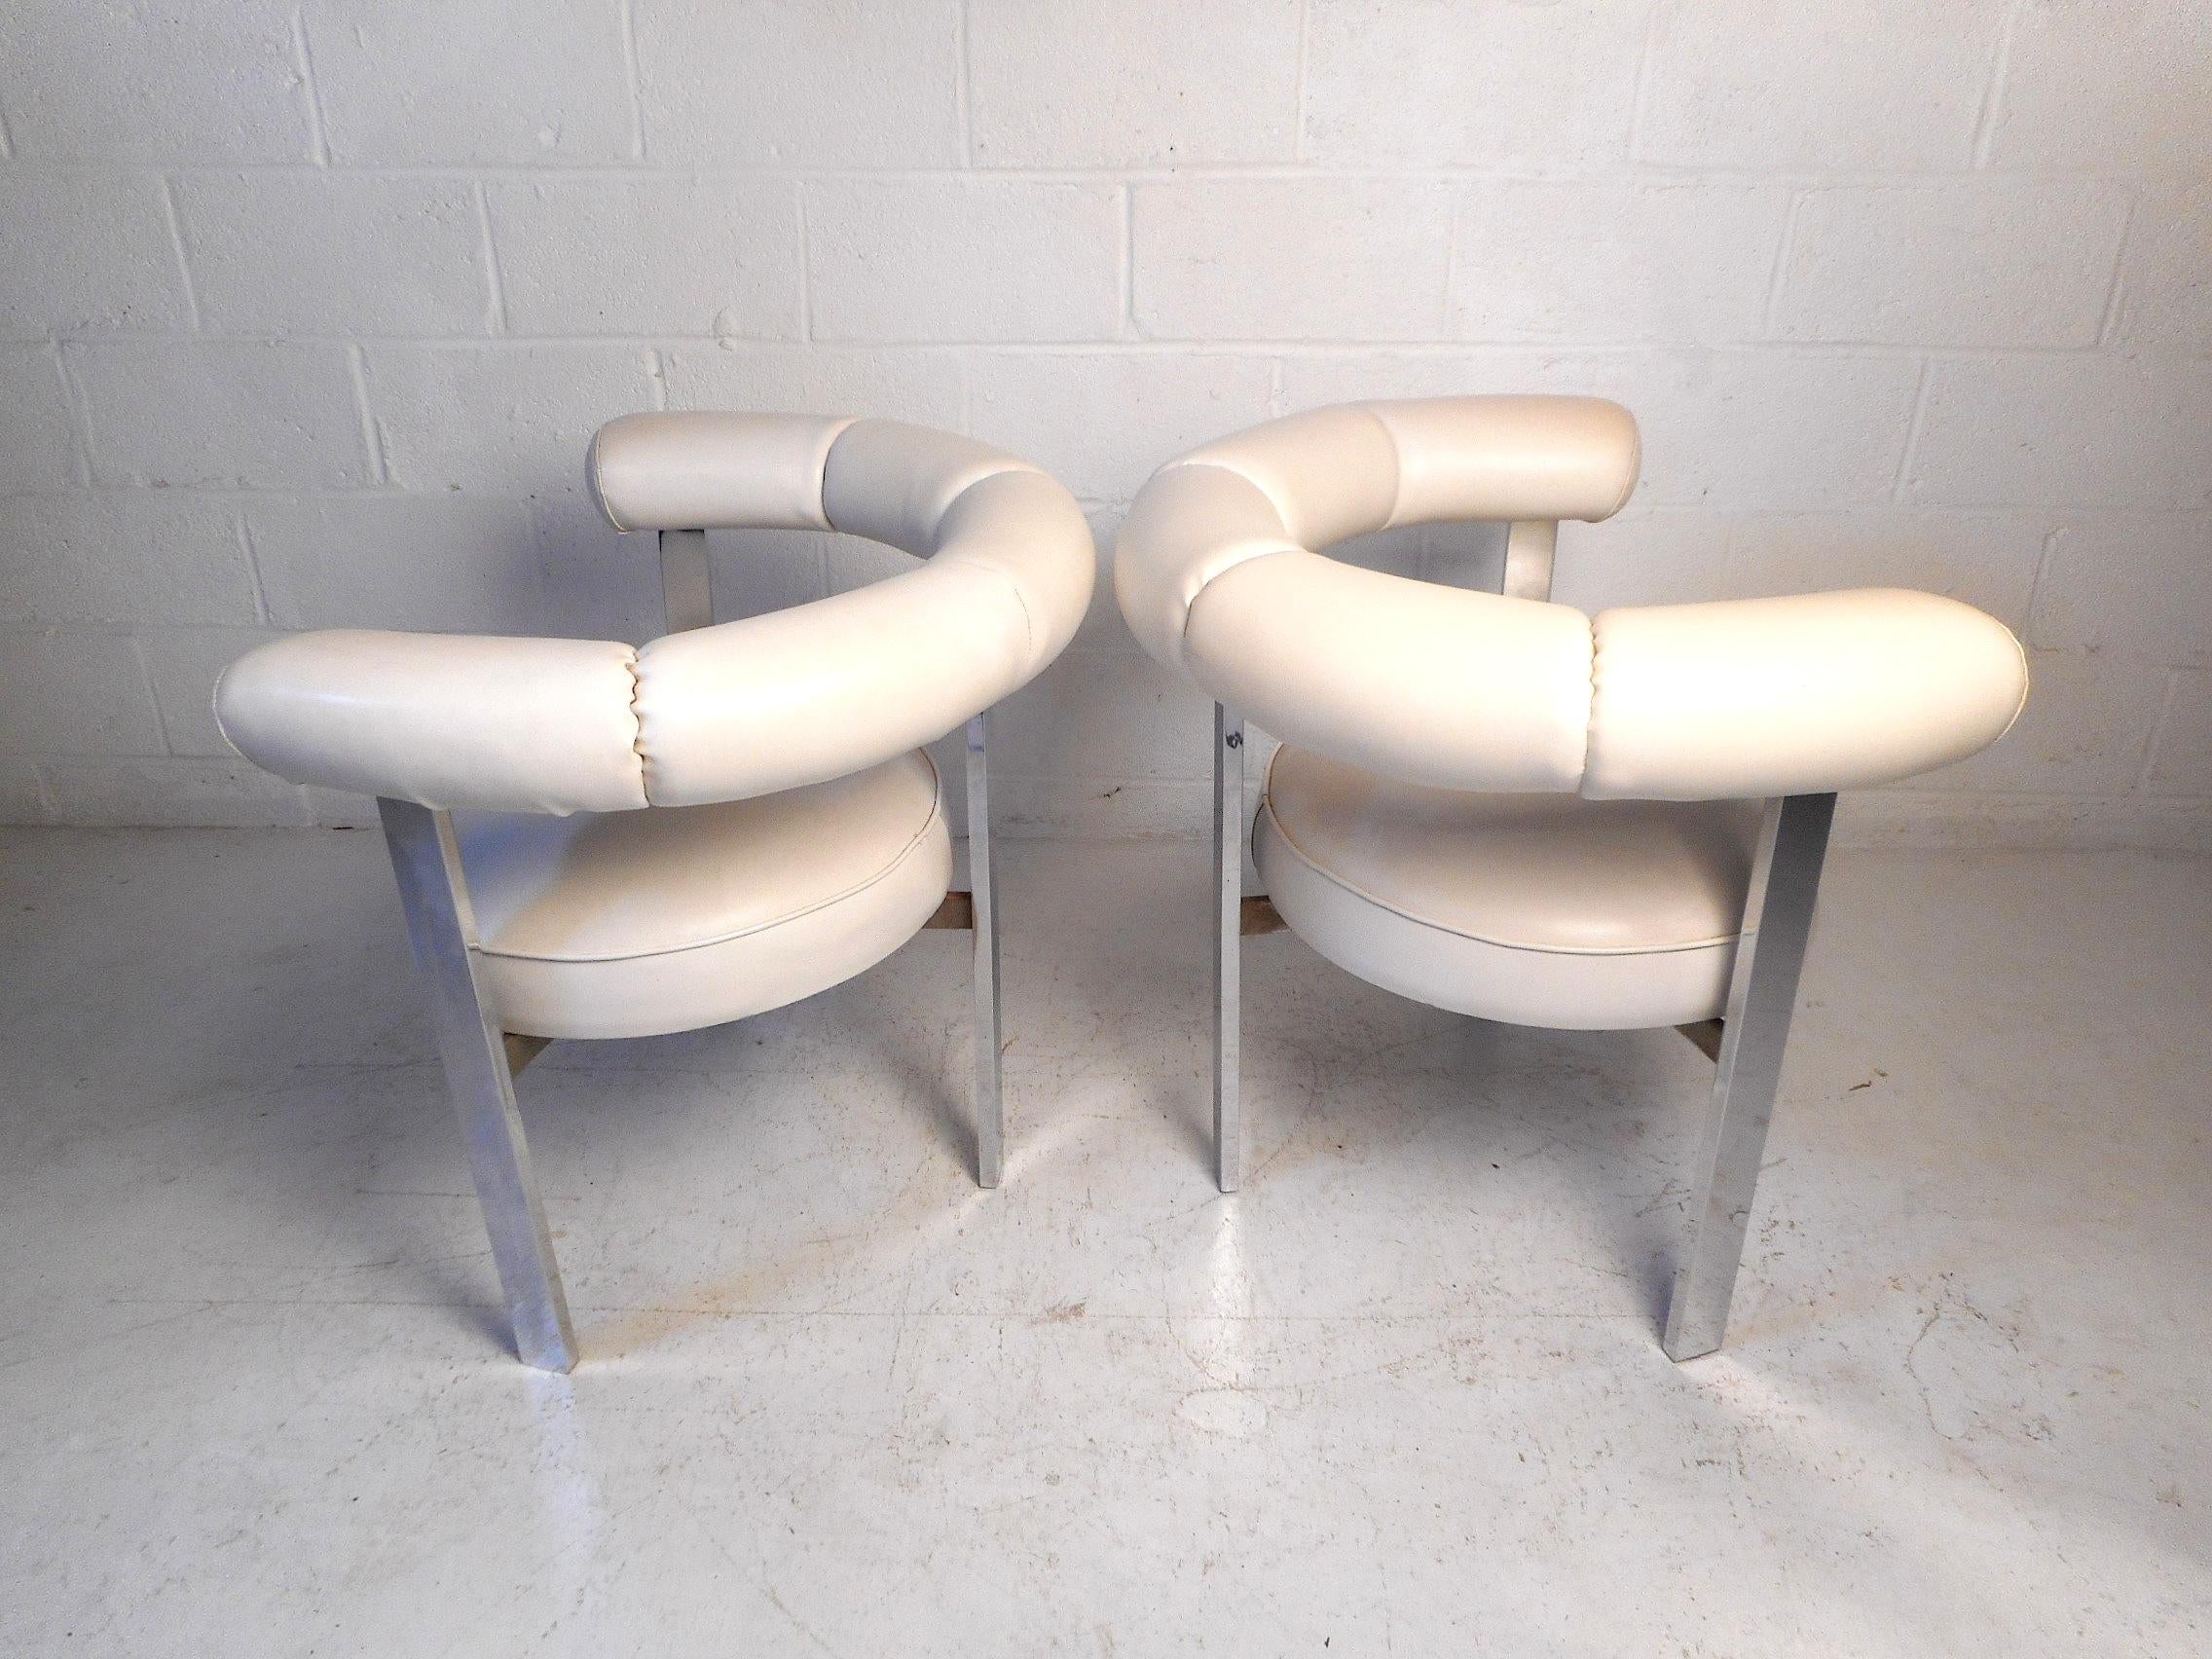 Late 20th Century Pair of Midcentury Faux-Leather and Chrome Barrel-Back Chairs For Sale